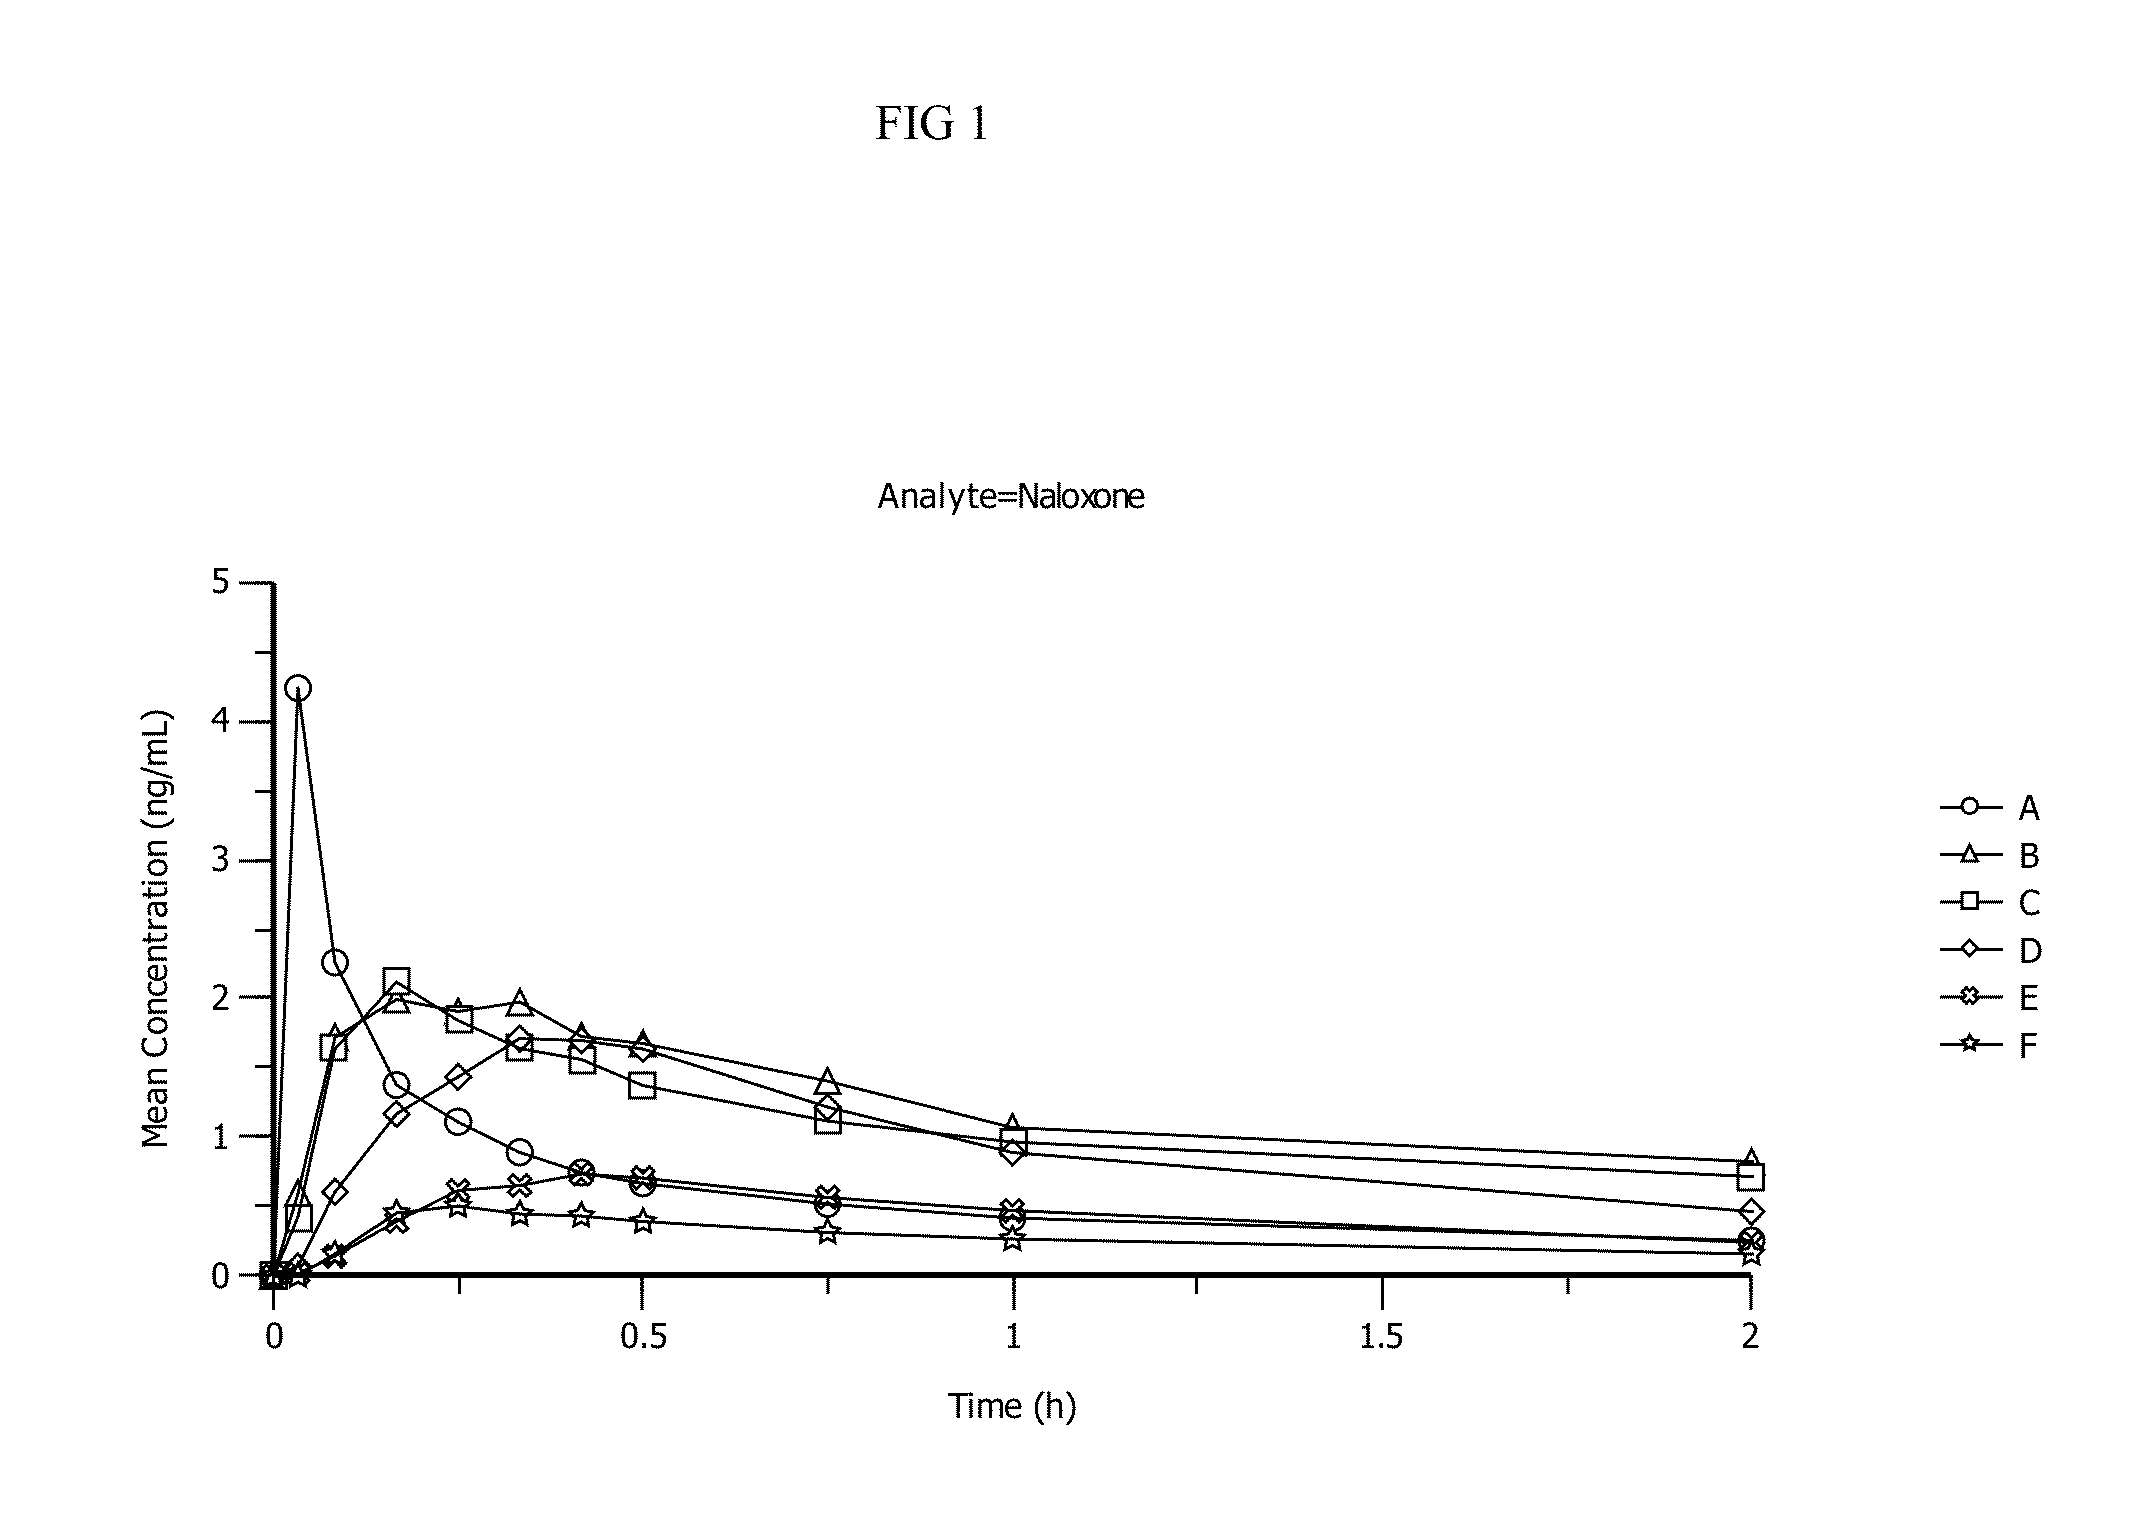 Intranasal naloxone compositions and methods of making and using same